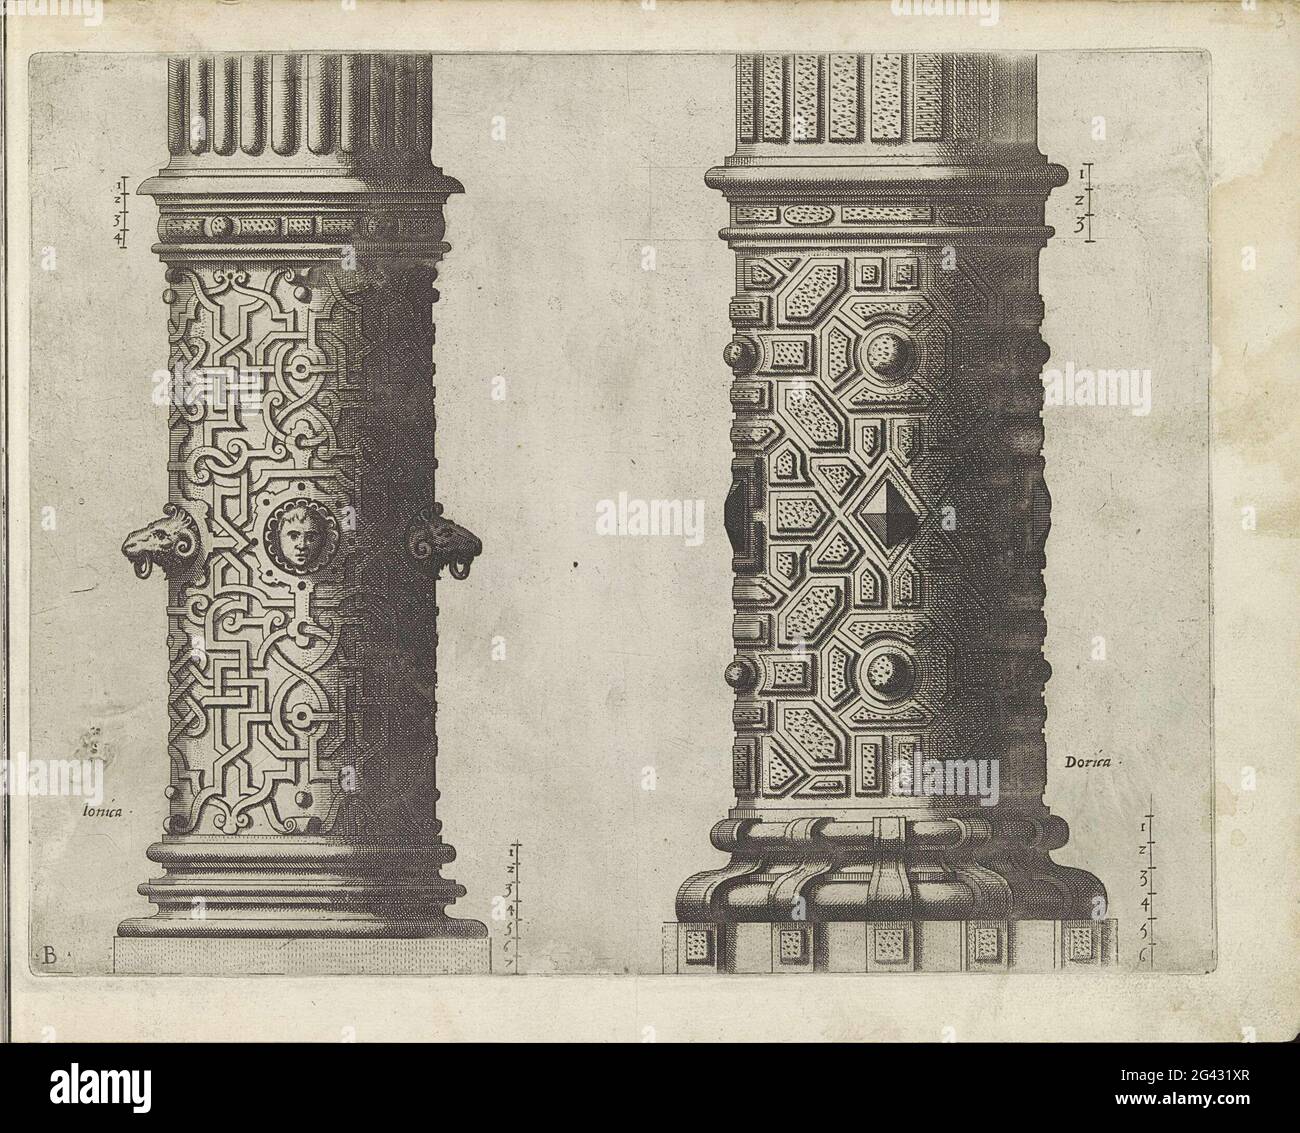 Two 'columnaealatae'; The first Boeck Ghemaeckt on the two Colomba Dorica and Ionica. Two 'columnaealatae'. Left the lower half of a column of the ionic order with moresken and mascarons. On the right the lower part of a column of the doric order with stylized bossage. A scale has been indicated twice at the performance. Leaf B. The print is part of an album. Stock Photo